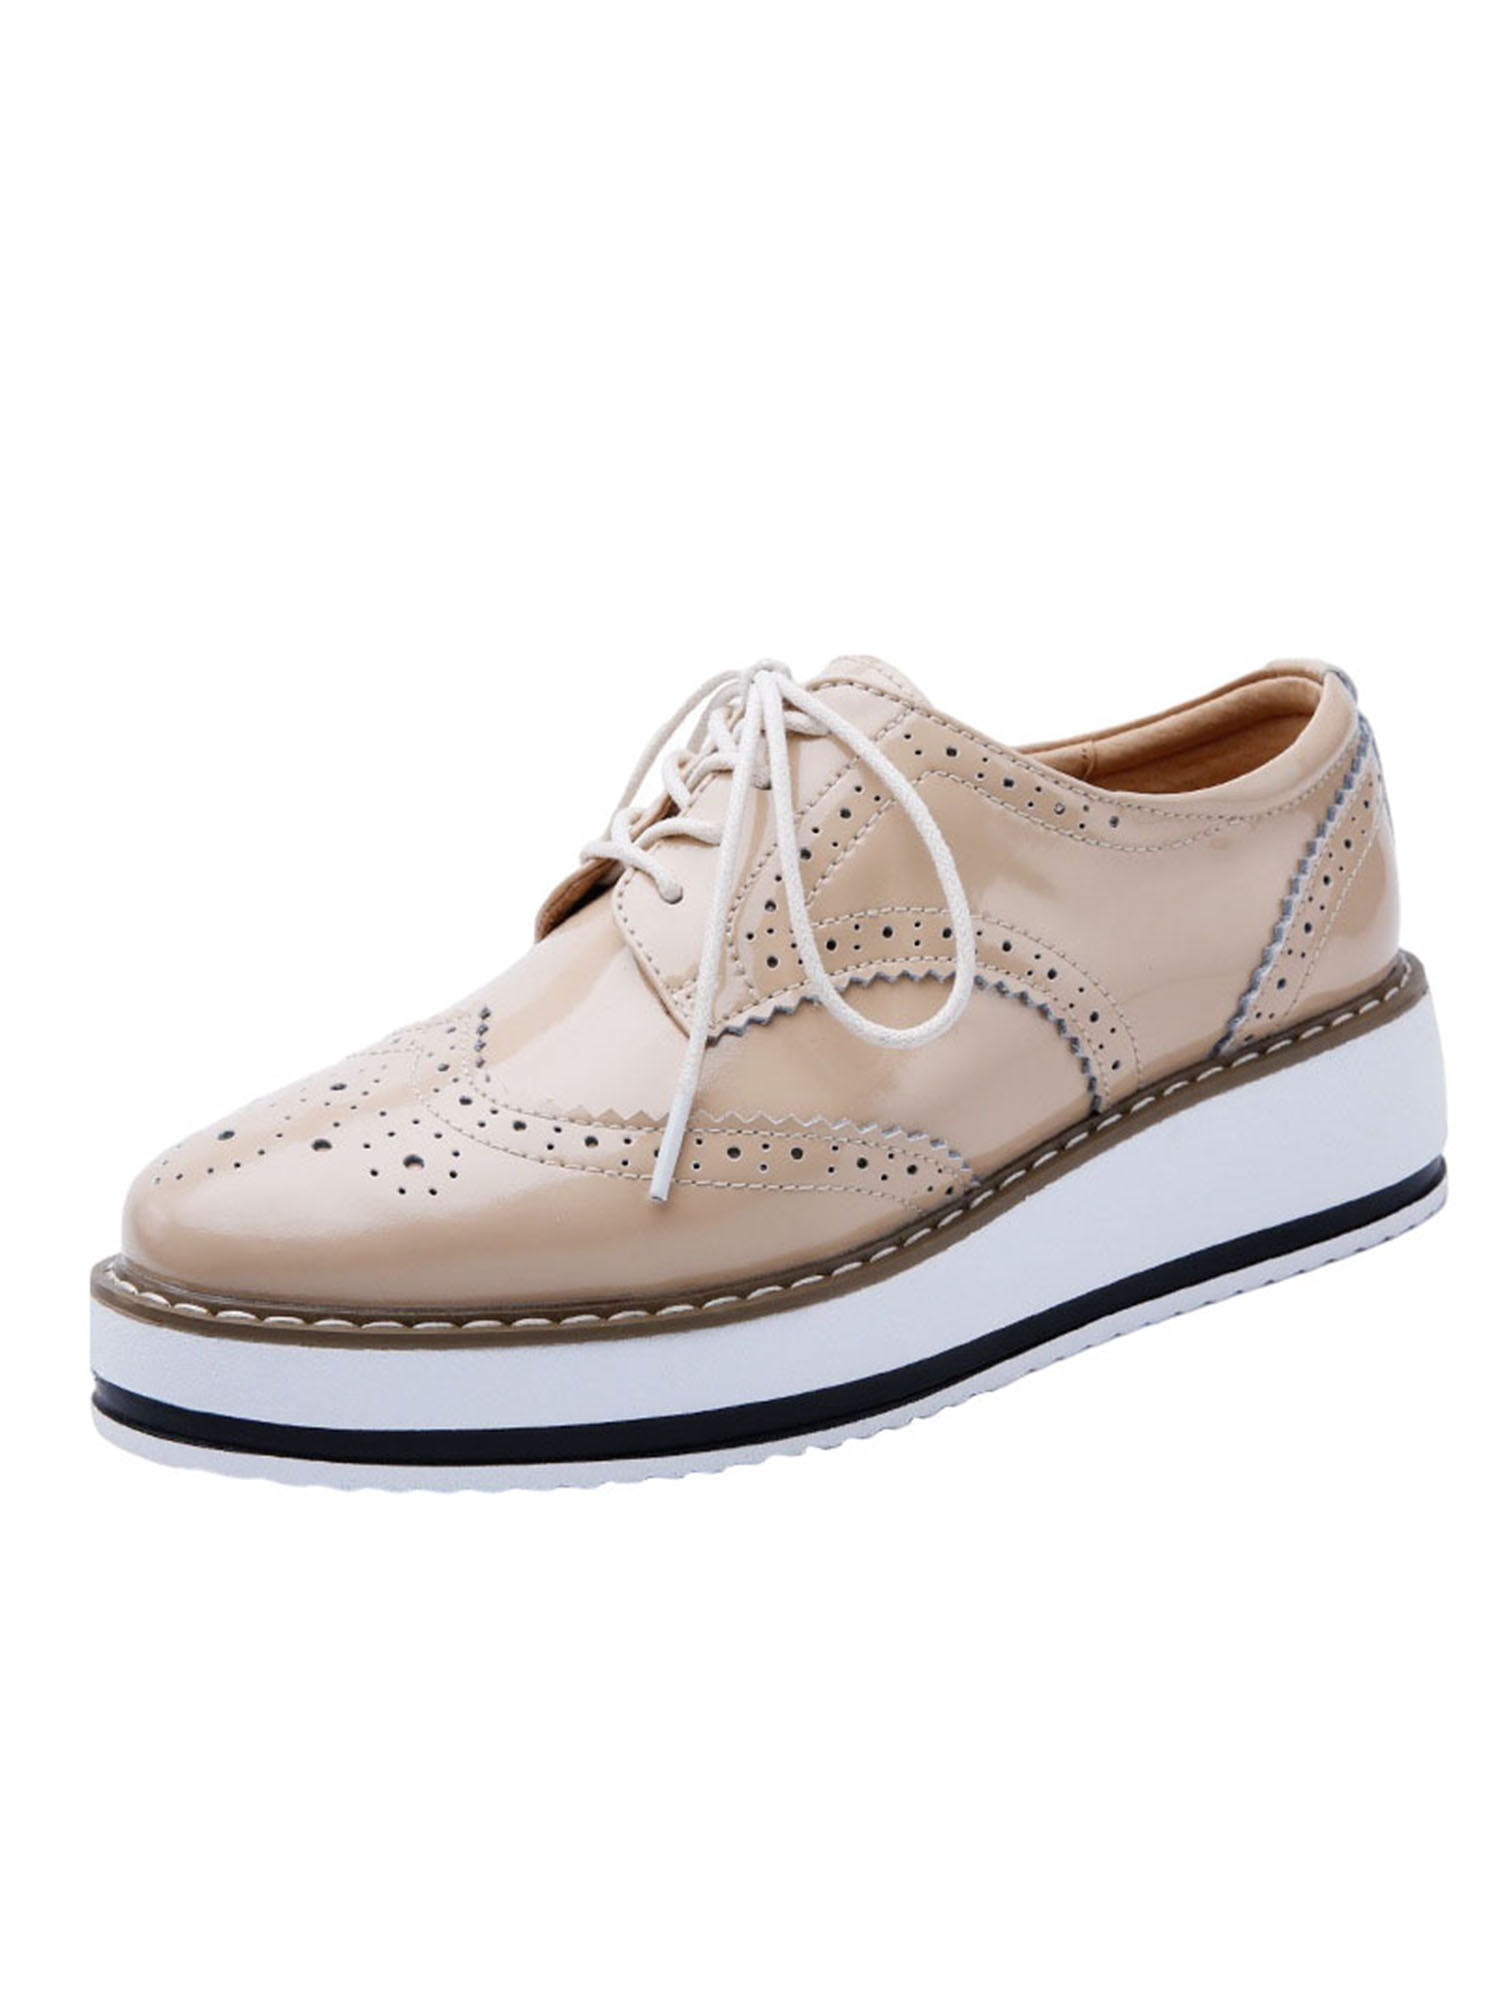 Women's Brogues OL Casual Comfy Flat Trainers Lace Up Oxfords Office Work Shoes 